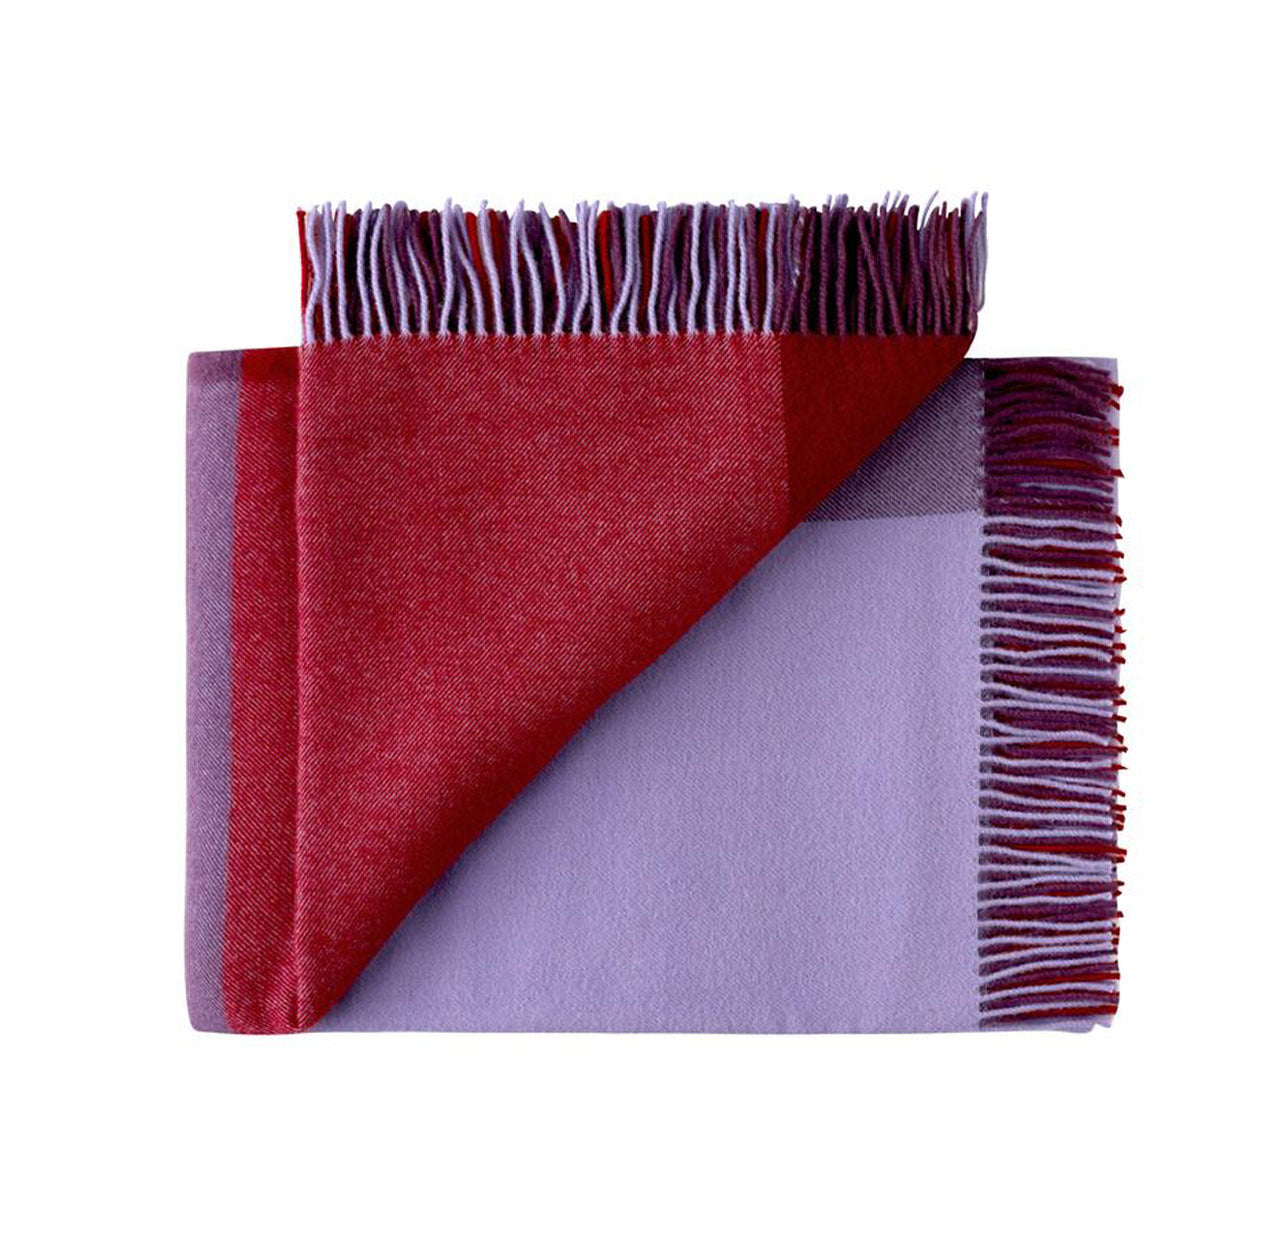 Wool Throw Roxburgh from Weave Home Berry Red  colour block pattern. New Zealand SKU 24474112